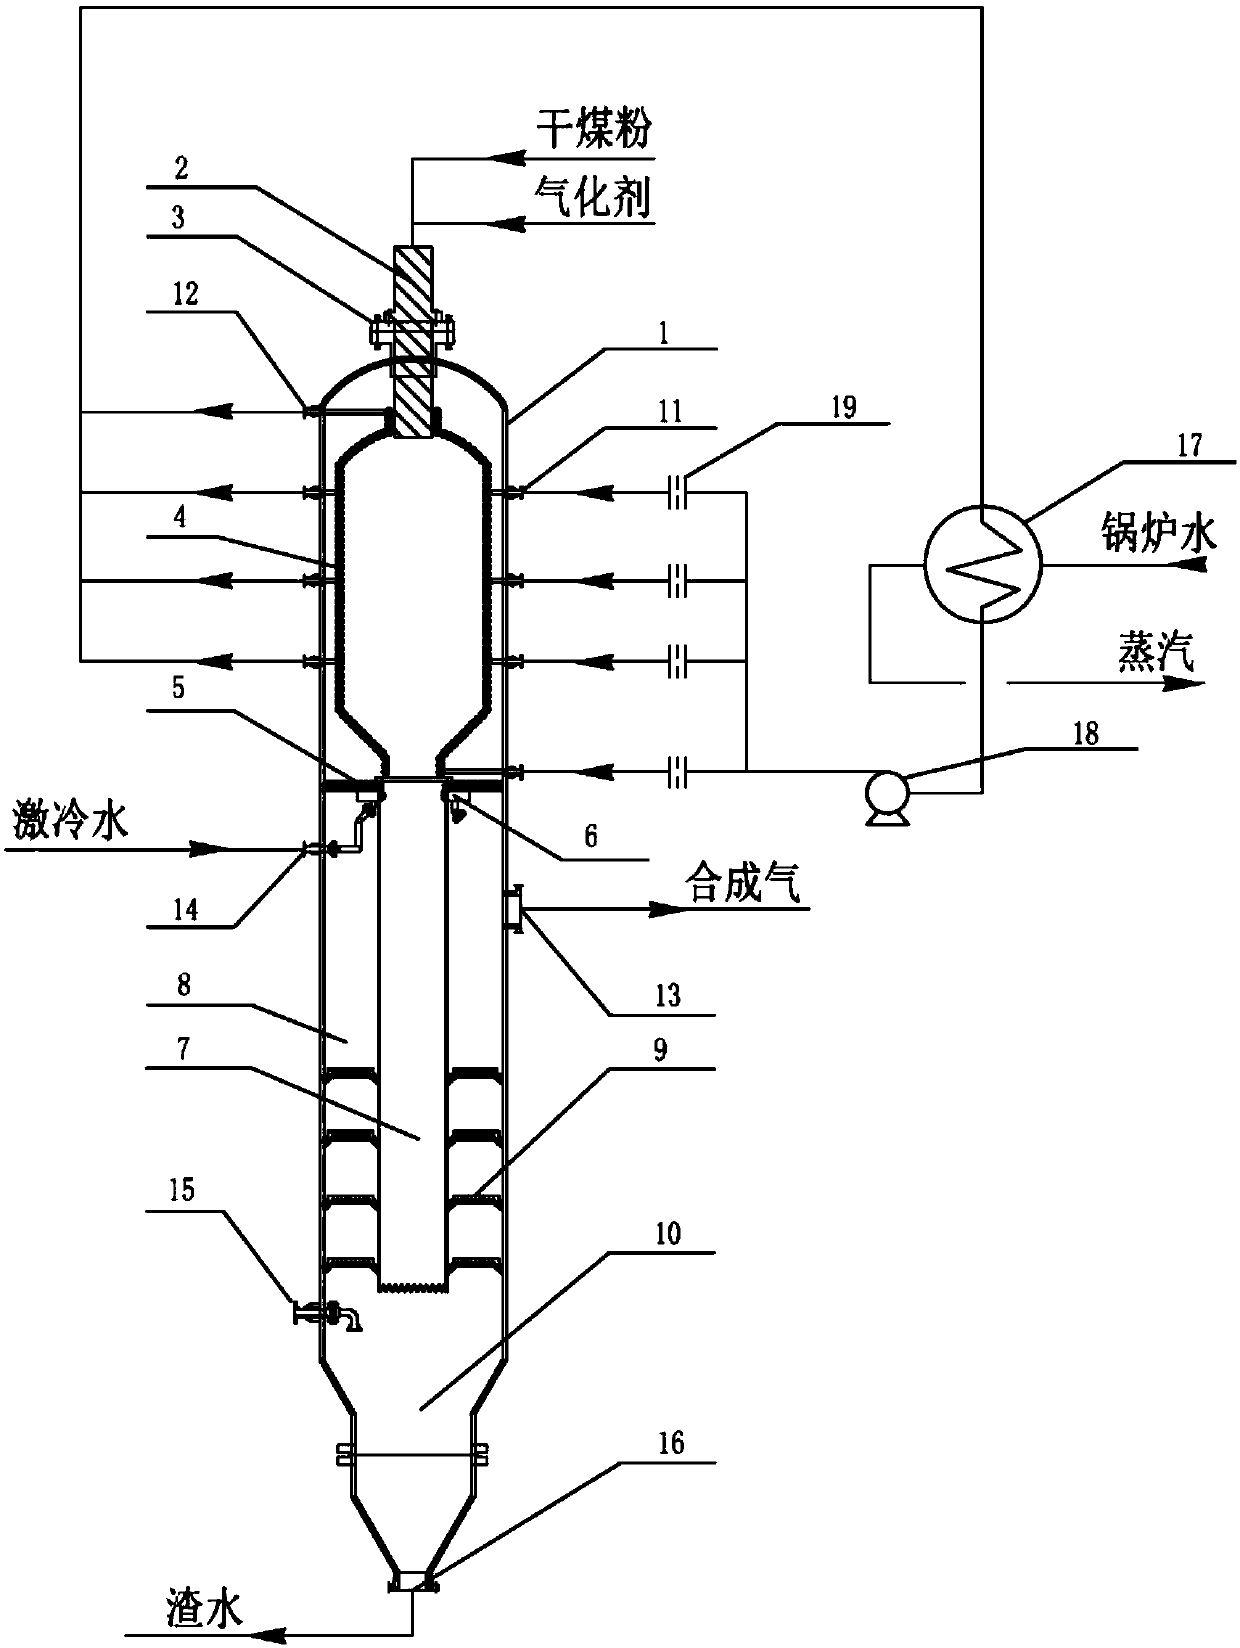 Downward chilling external heat removal pulverized coal pressurized gasification device